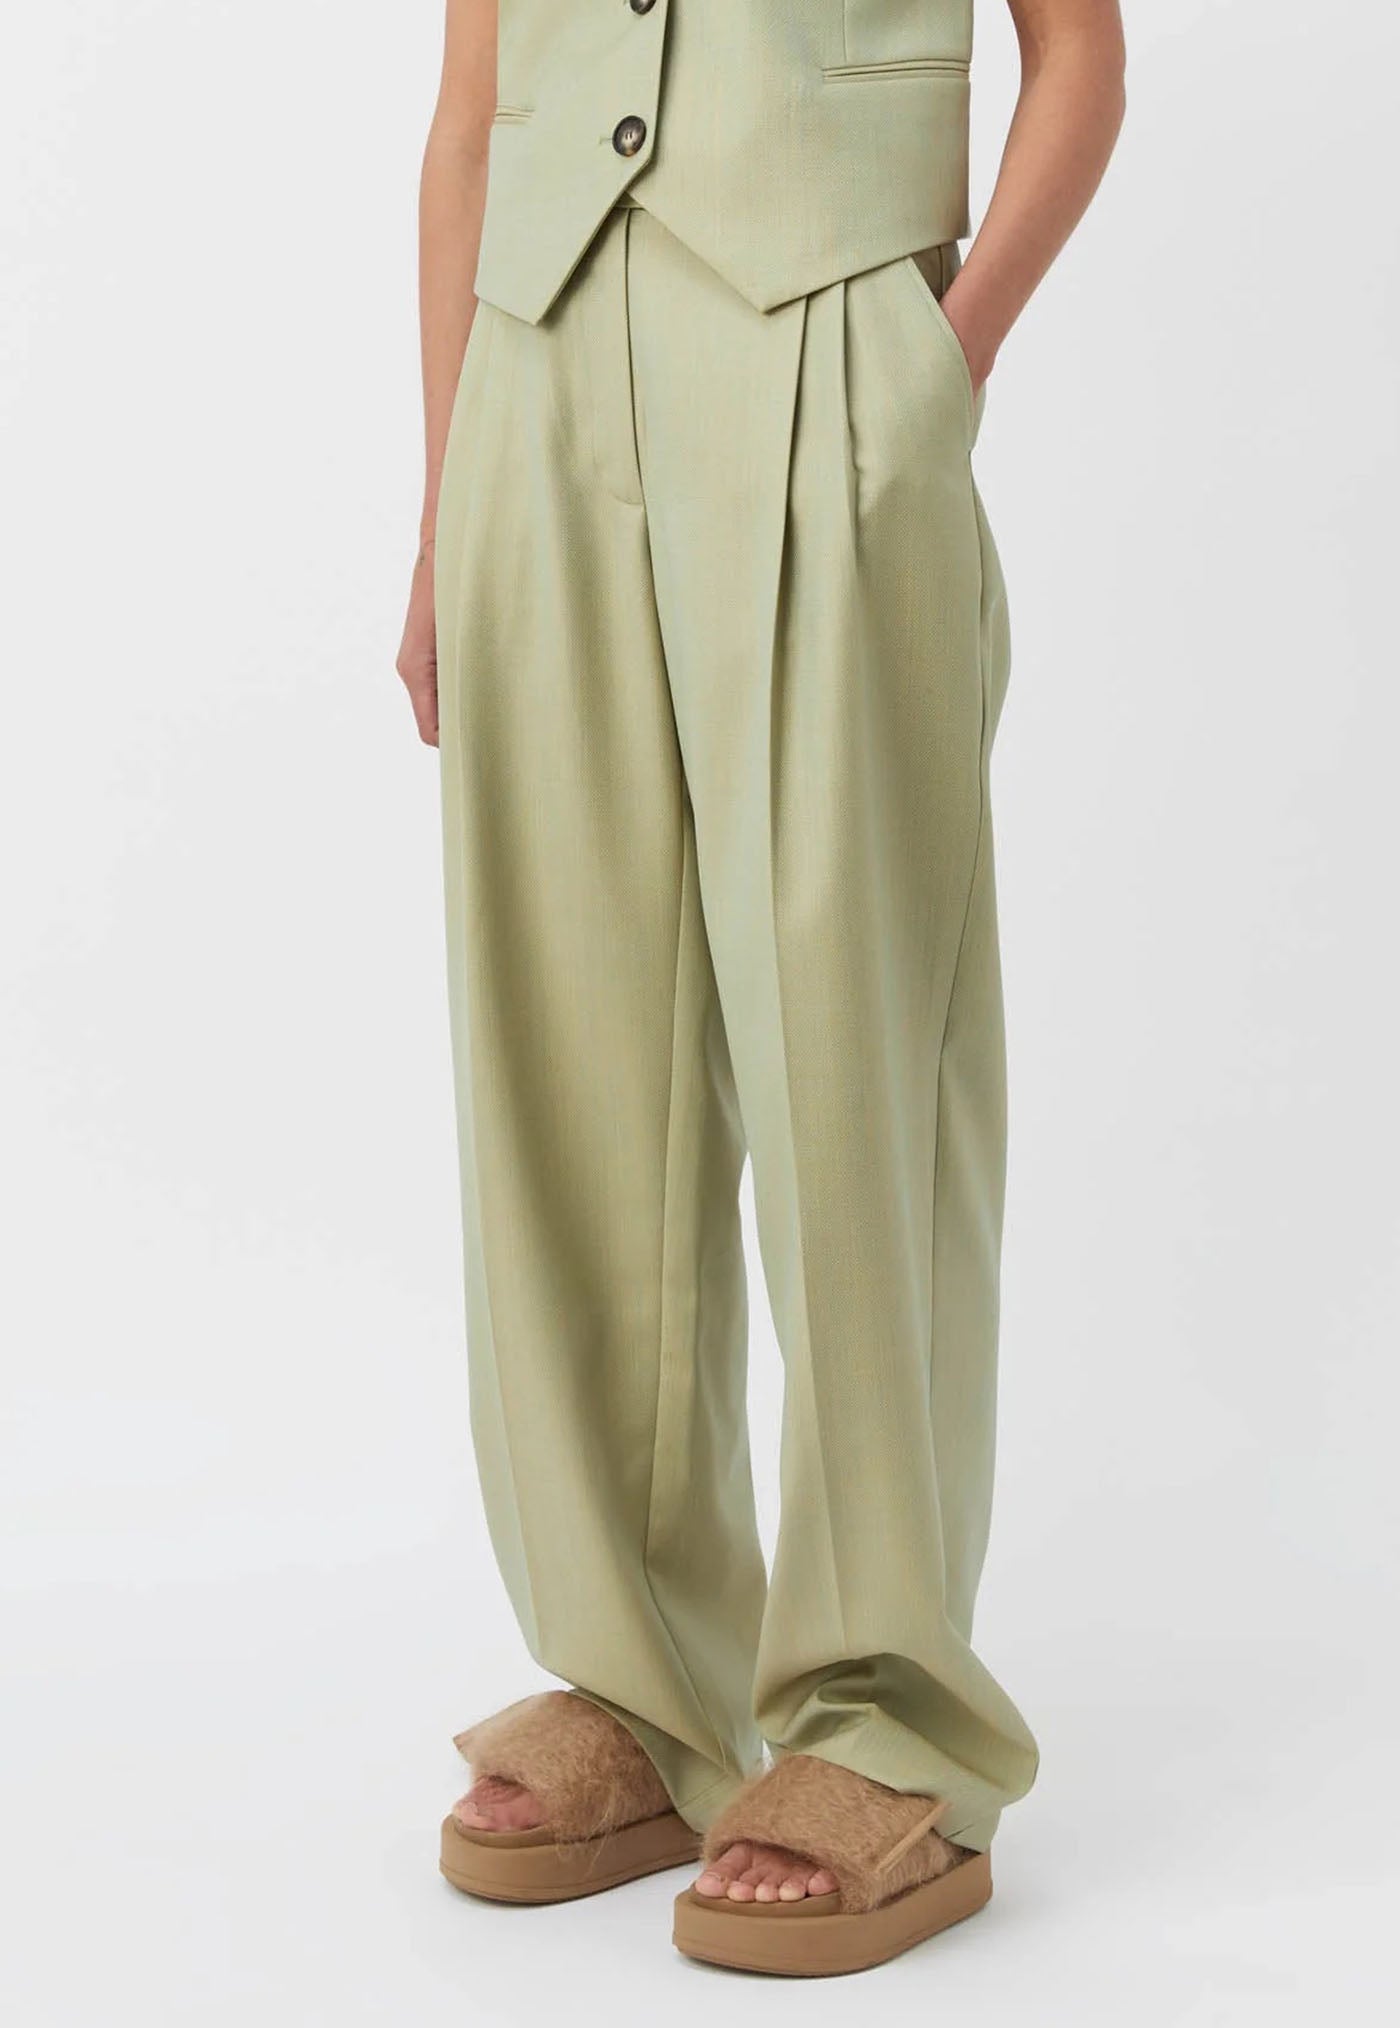 Jaccard Wool Pant - Lime Blue sold by Angel Divine